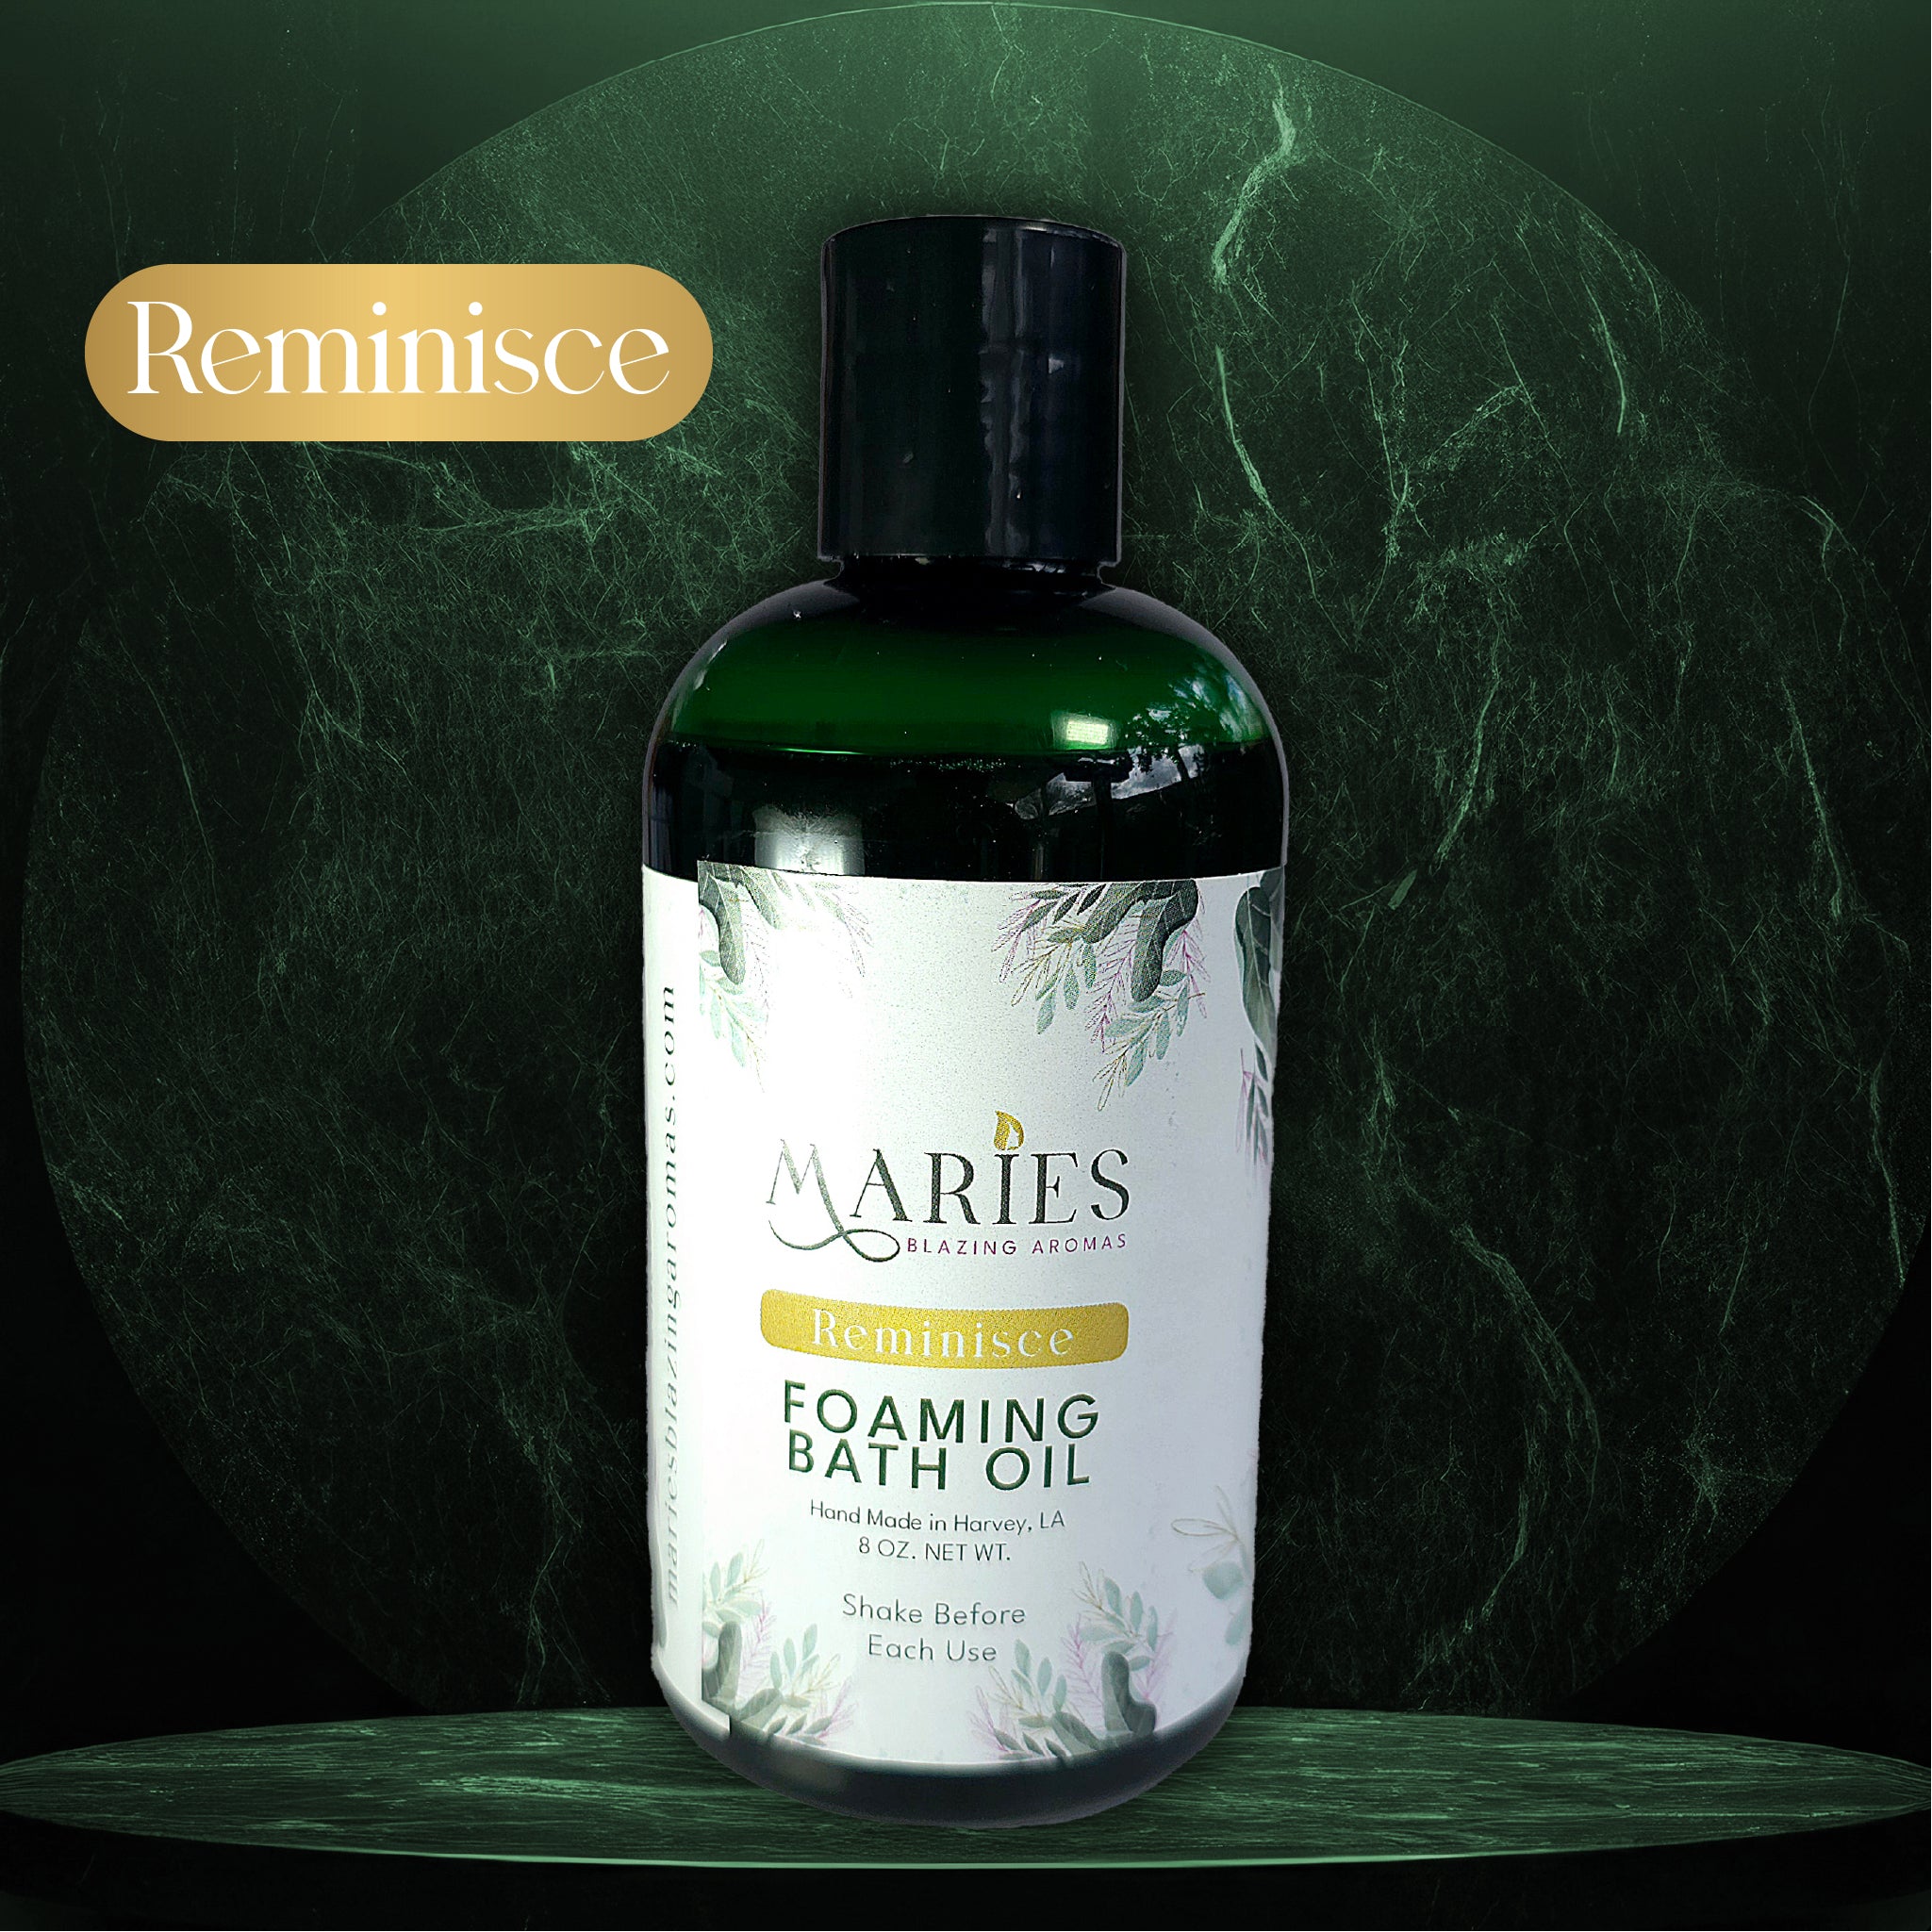 Reminisce Perfume Foaming Bath Oil for a tranquil bath by Maries Blazing Aroma